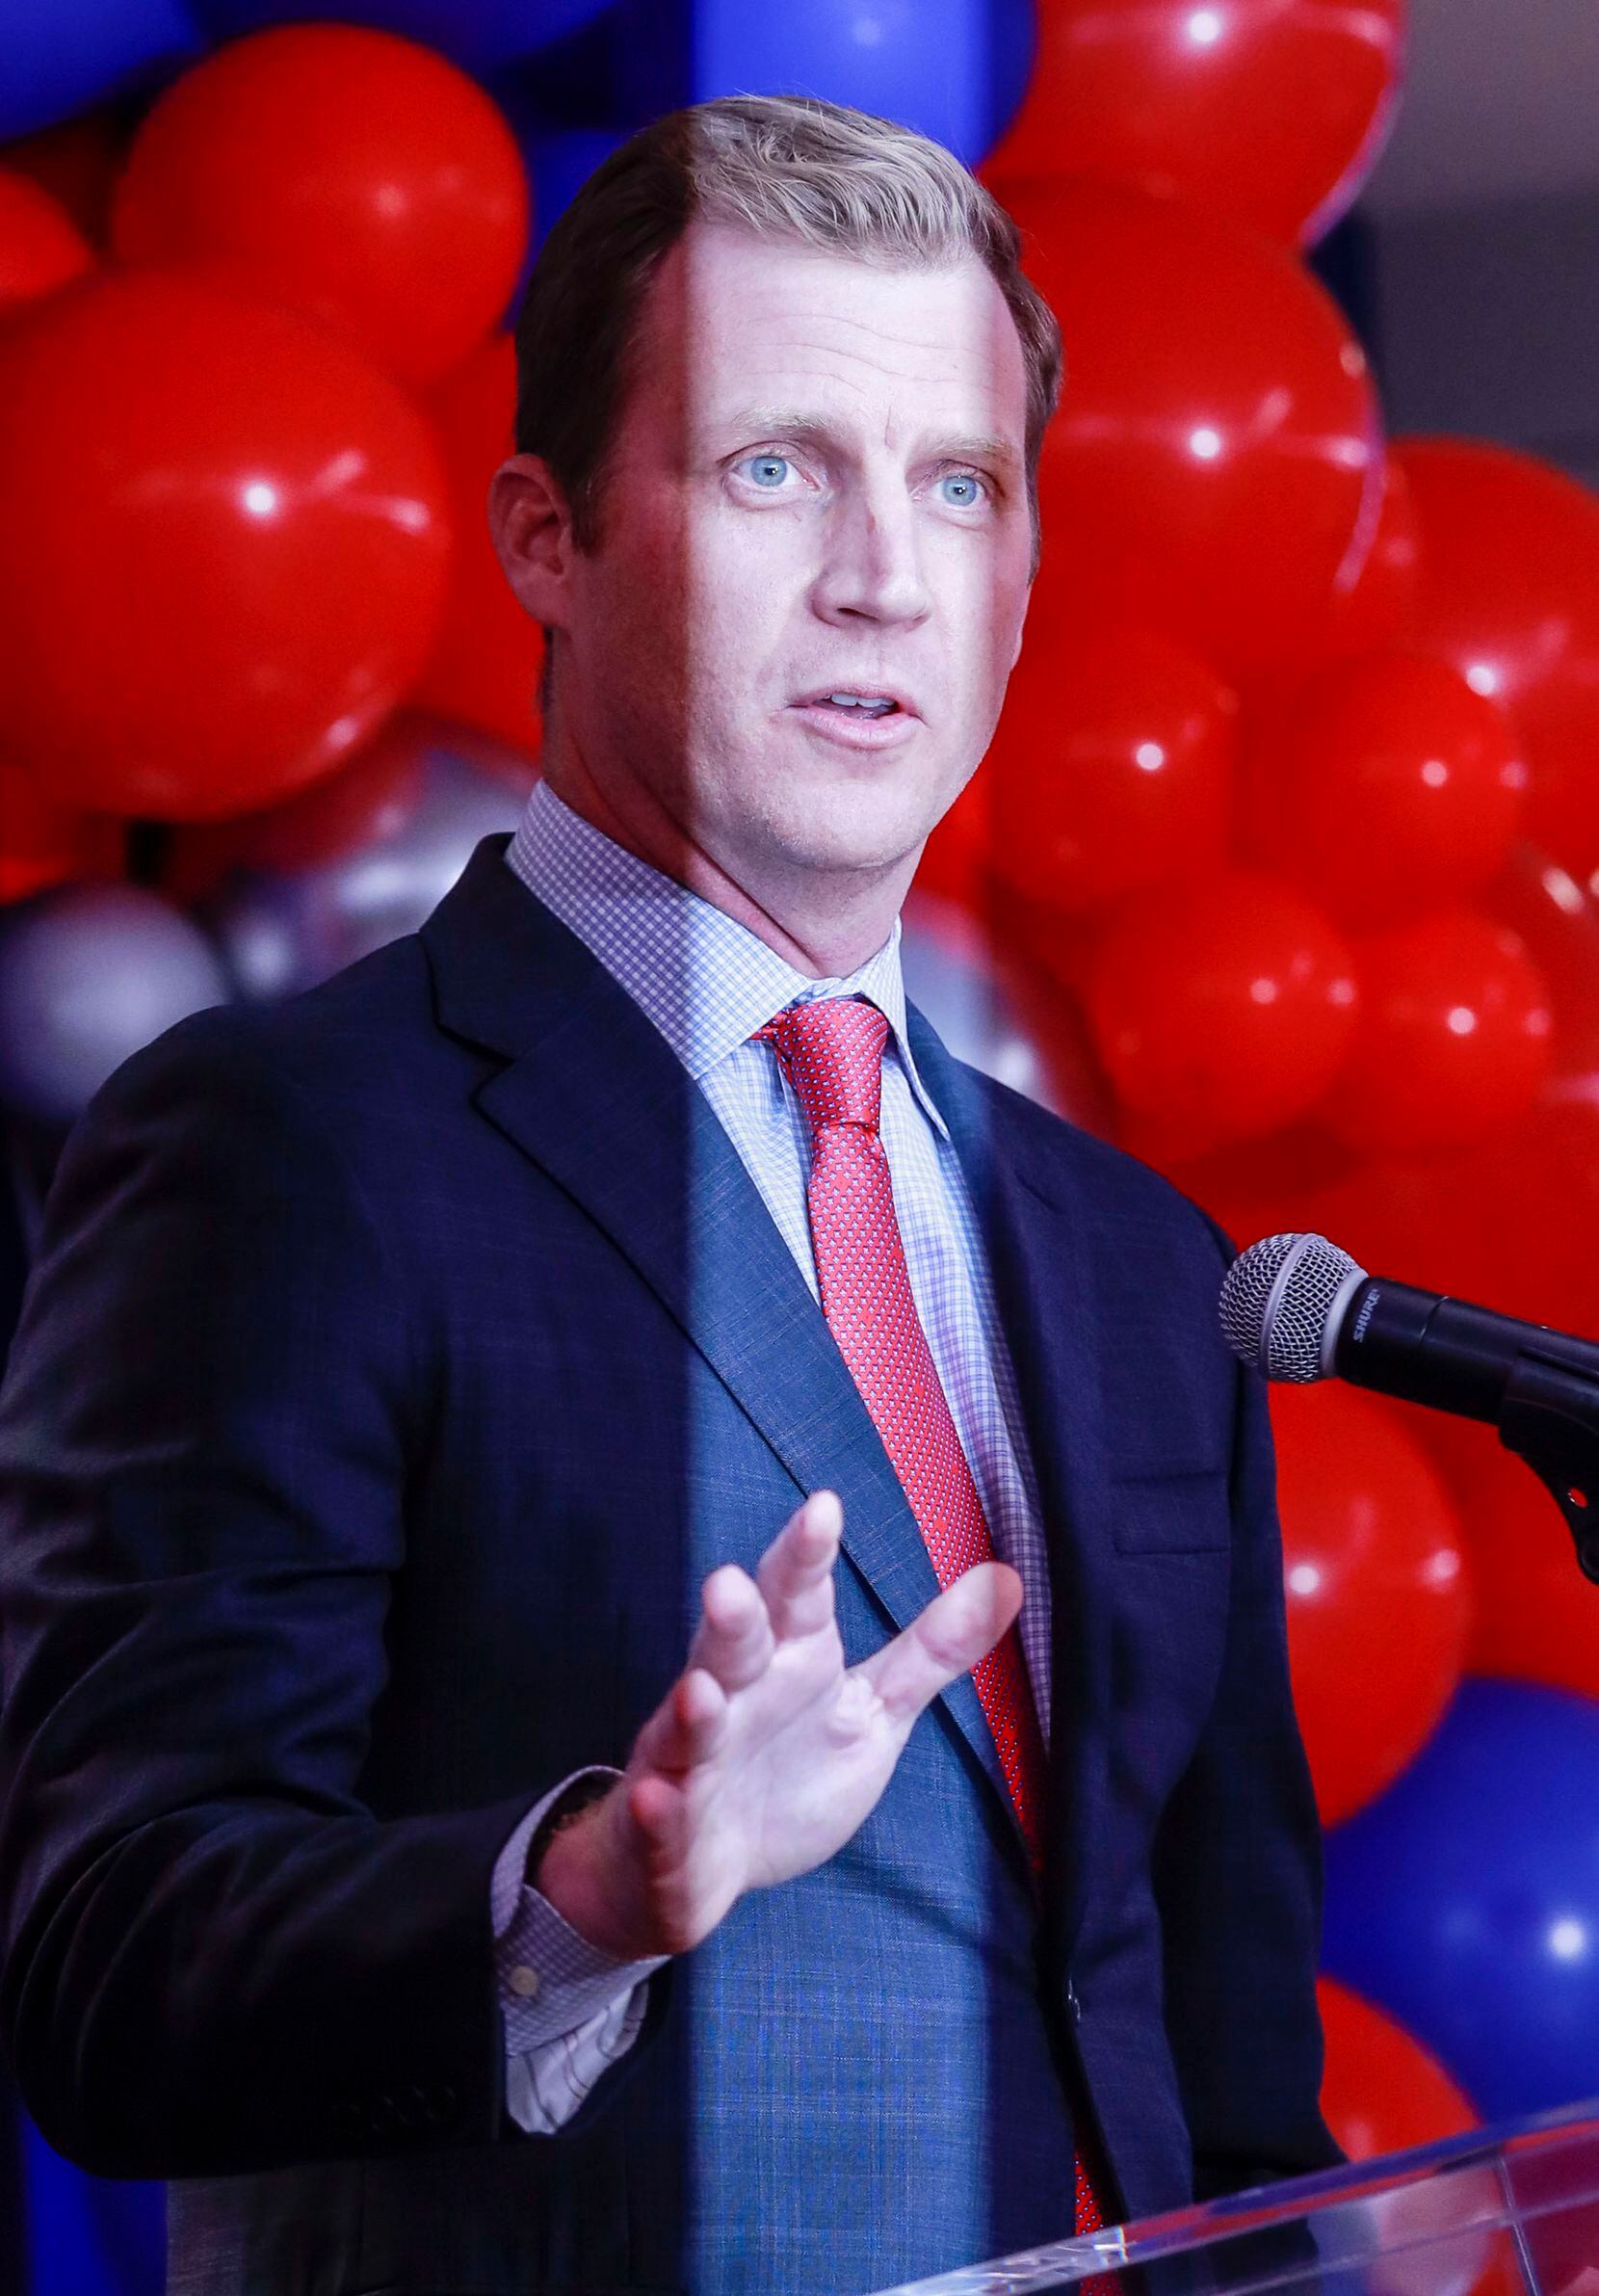 A streak of light from a photographer's flash illuminates Southern Methodist University's head football coach, Rhett Lashlee speaks at a news conference for the first time at Miller Boulevard Ballroom in Dallas on Tuesday, Nov. 30, 2021. Lashlee was Southern Methodist University's former offensive coordinator football coach in 2018 and 2019 before going to the University of Miami for two seasons. (Rebecca Slezak/The Dallas Morning News)